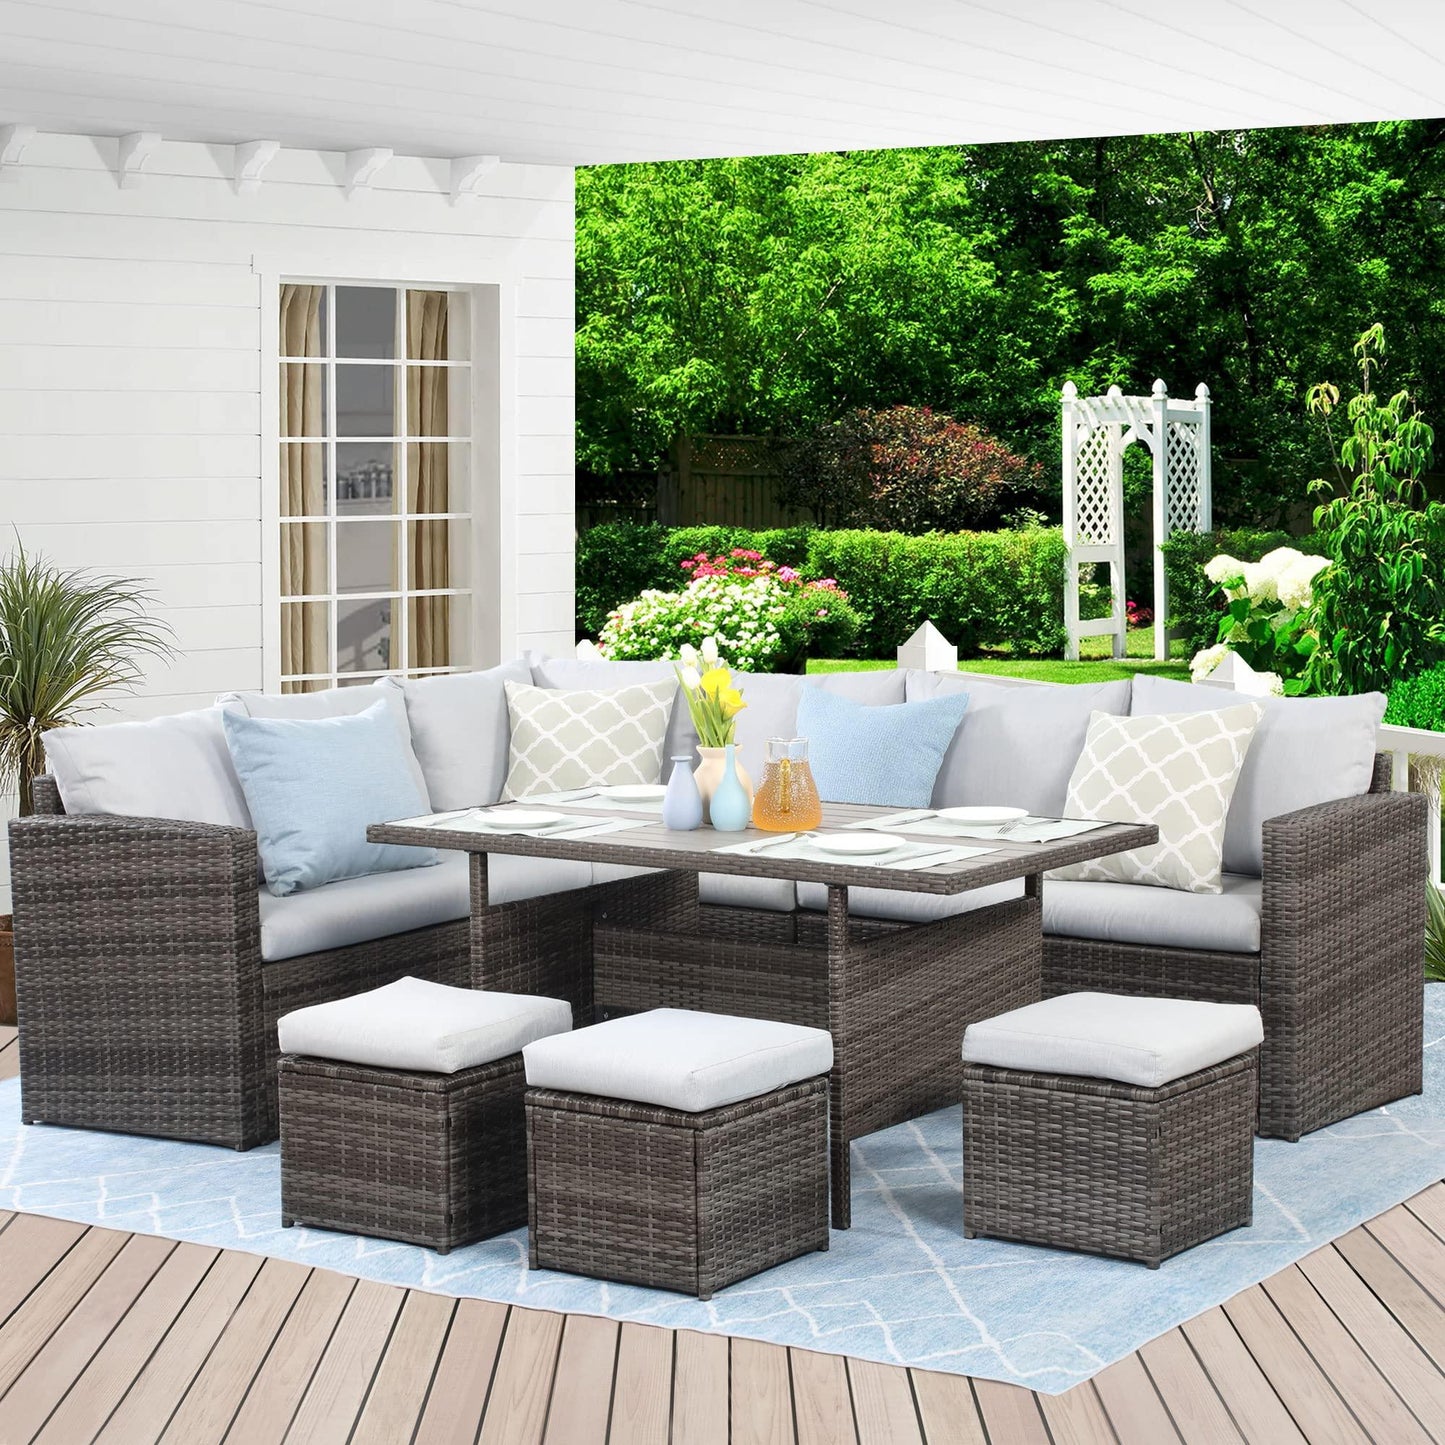 Wisteria Lane Outdoor Patio Furniture Set, 7 Piece Wicker Rattan Outdoor Dining Set with Dining Table and Ottomans, Patio Table and Chairs Set, Outdoor Sectional, Grey - CookCave